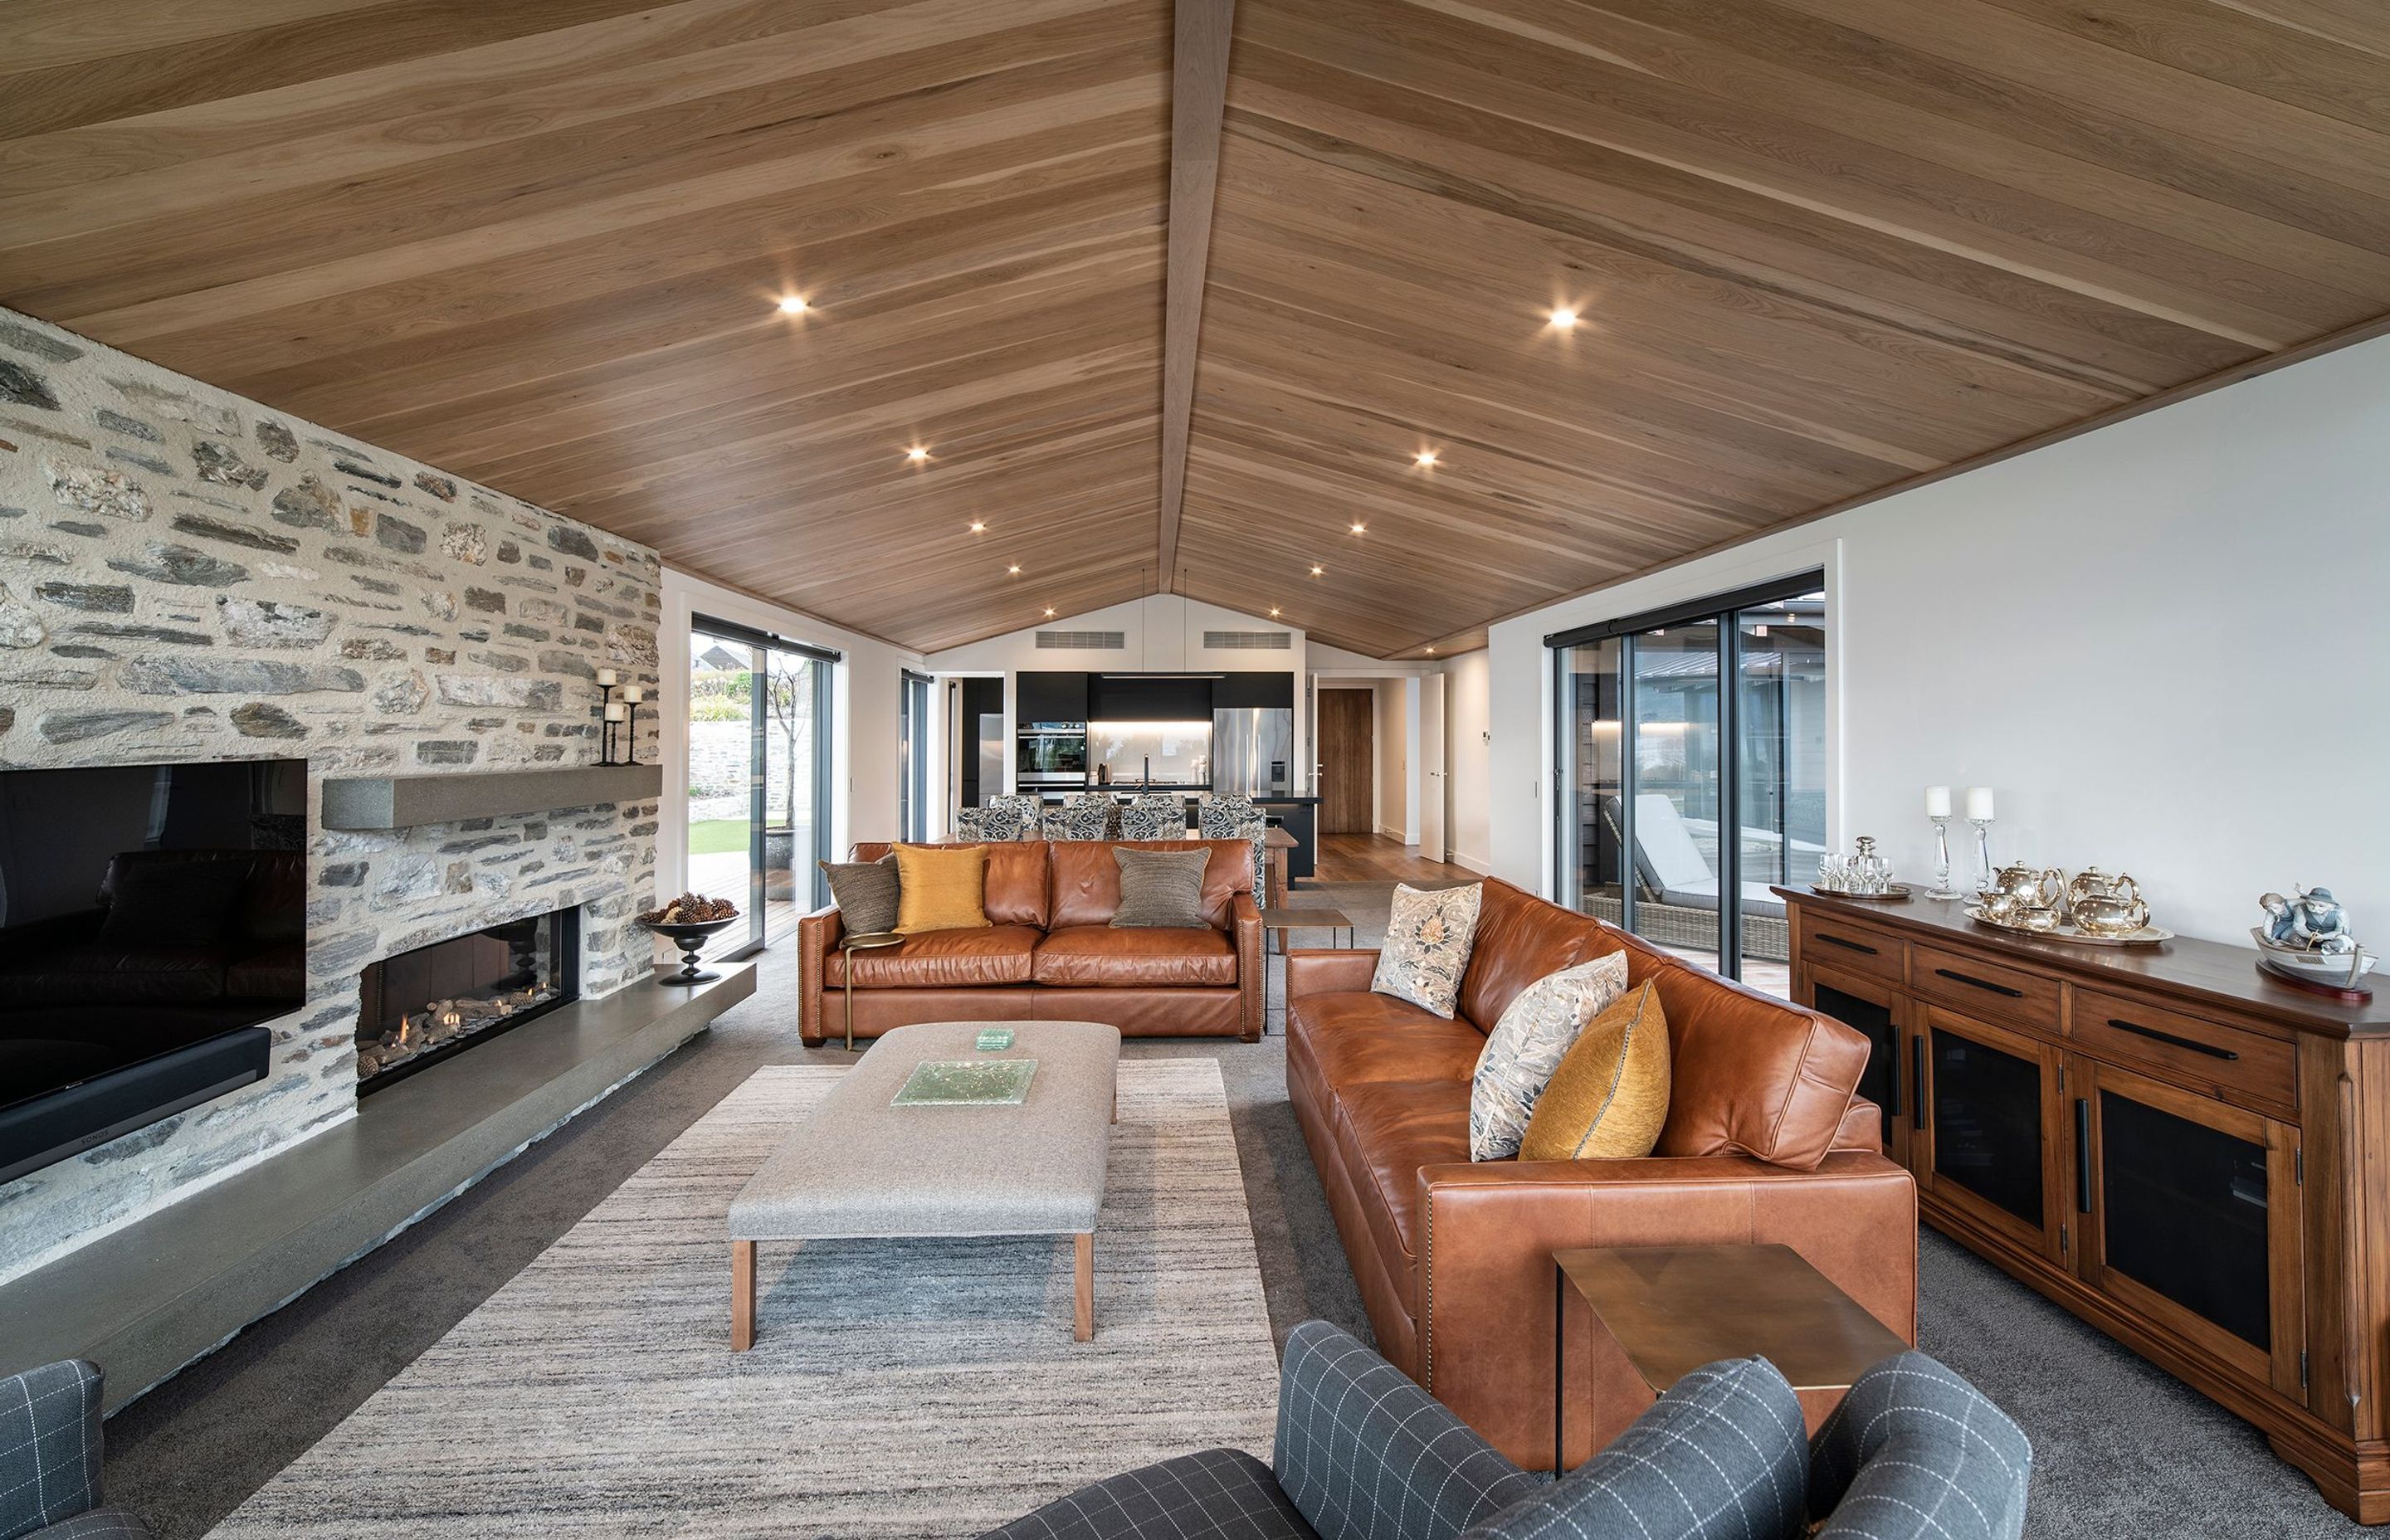 The main living area is contained within one of the two pavilion-style structures that make up the public and private spaces of the home. Off either side of the living area are multiple outdoor zones for further entertaining.